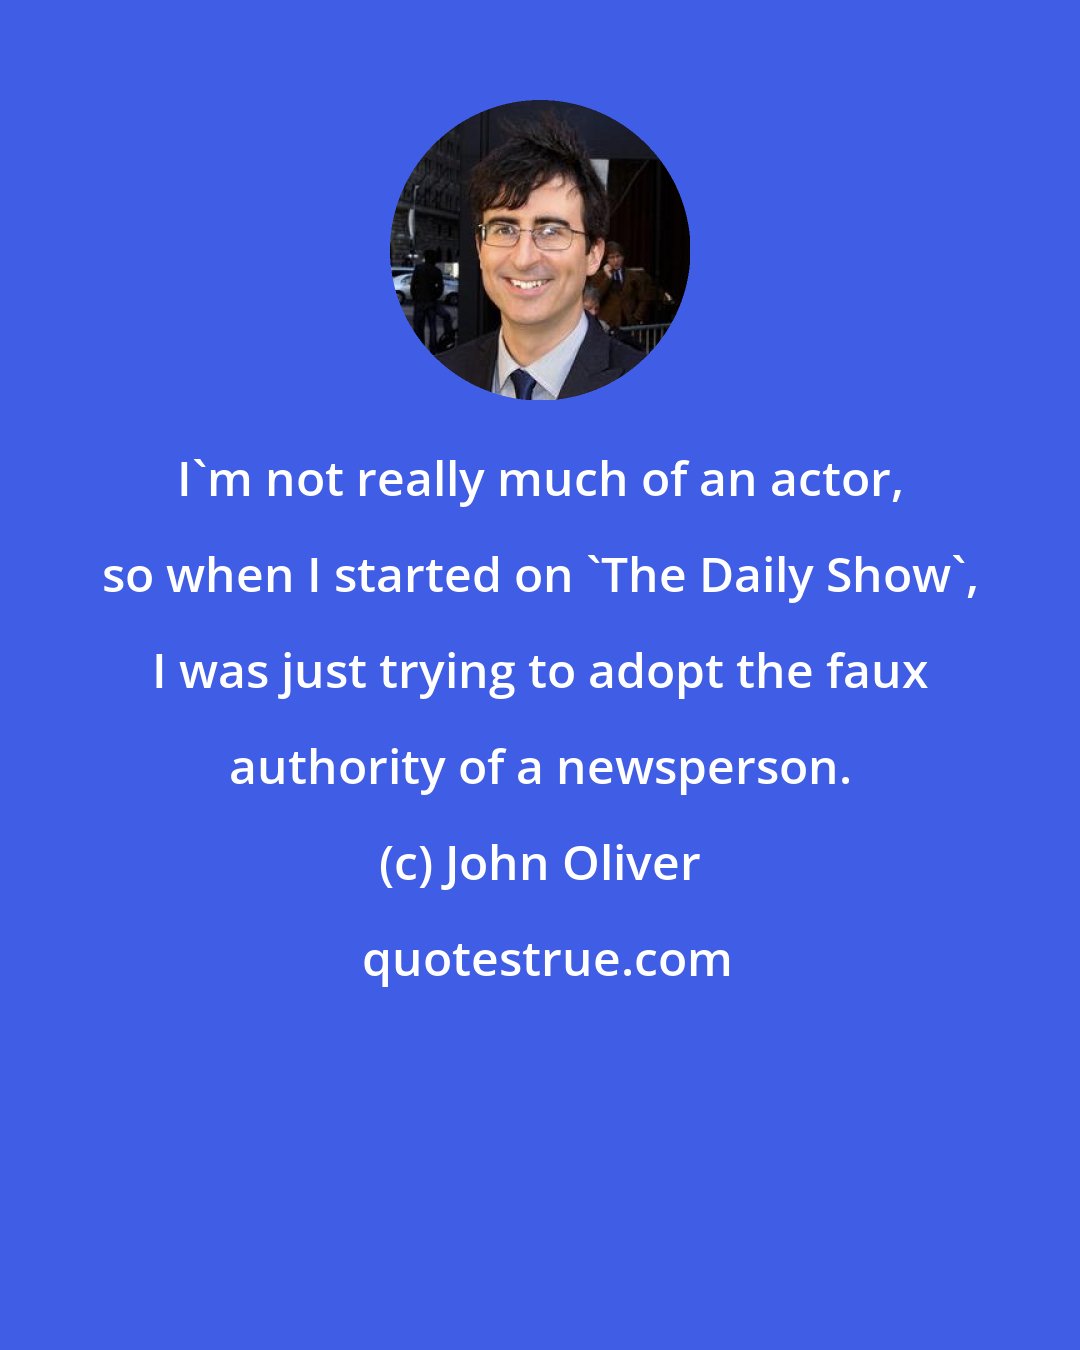 John Oliver: I'm not really much of an actor, so when I started on 'The Daily Show', I was just trying to adopt the faux authority of a newsperson.